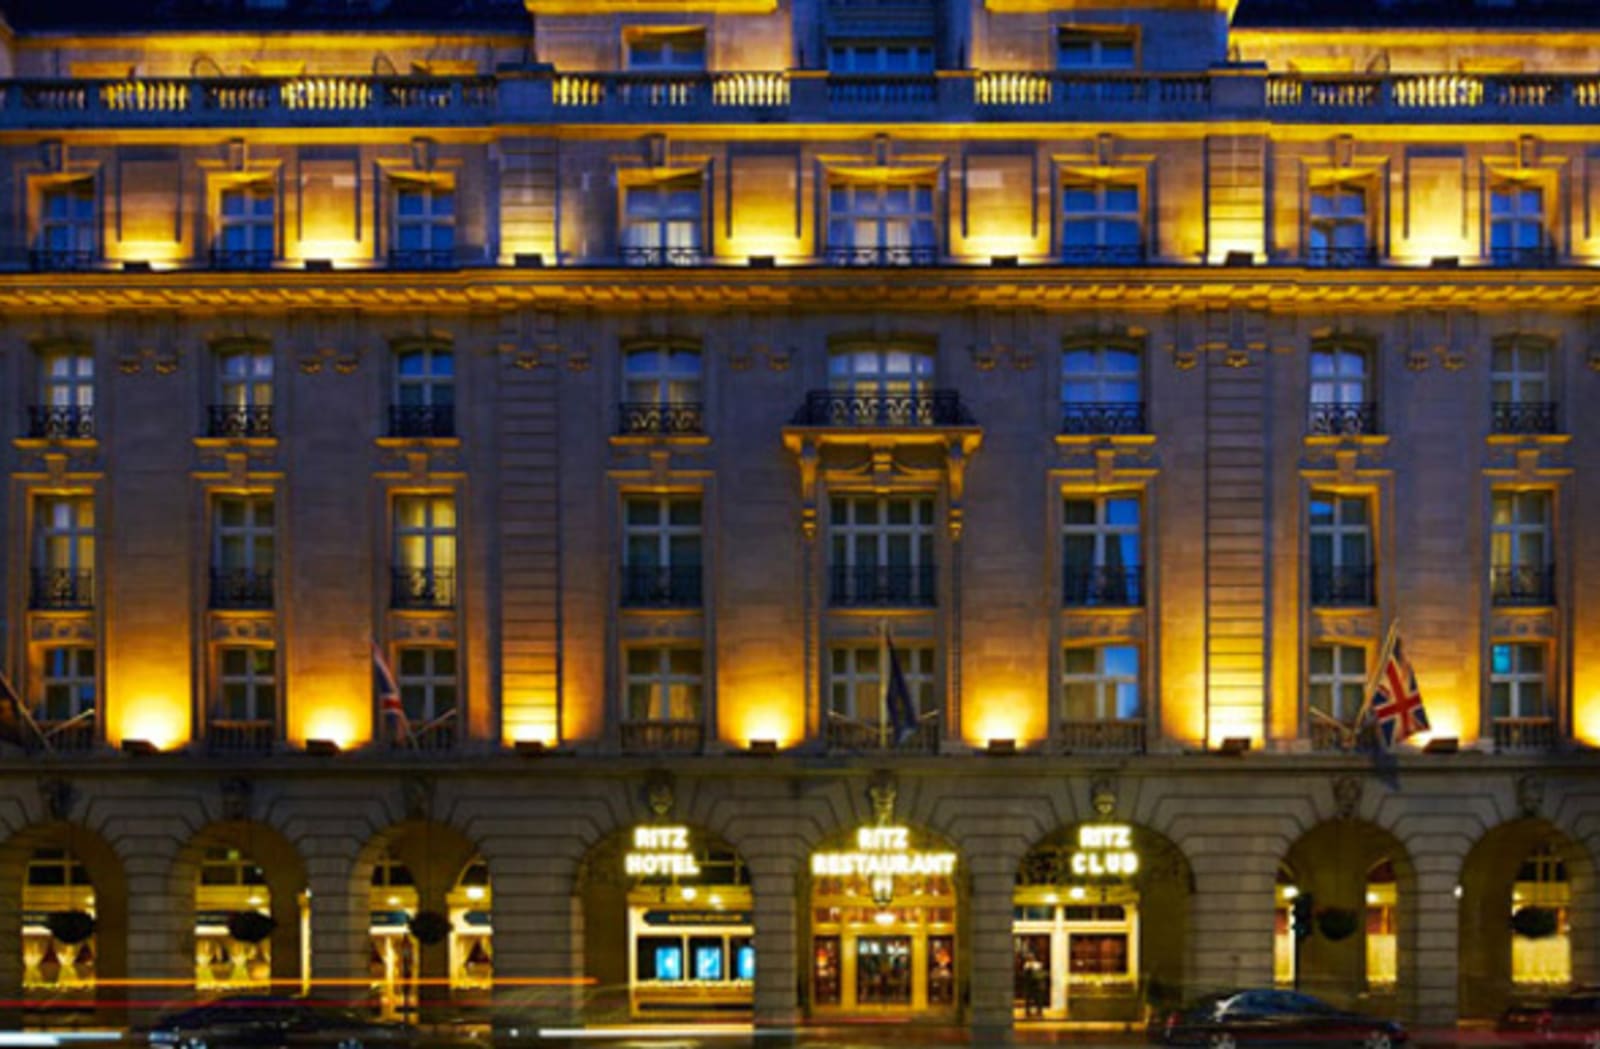 The Ritz hotel in the late afternoon, lit up by many warm lights